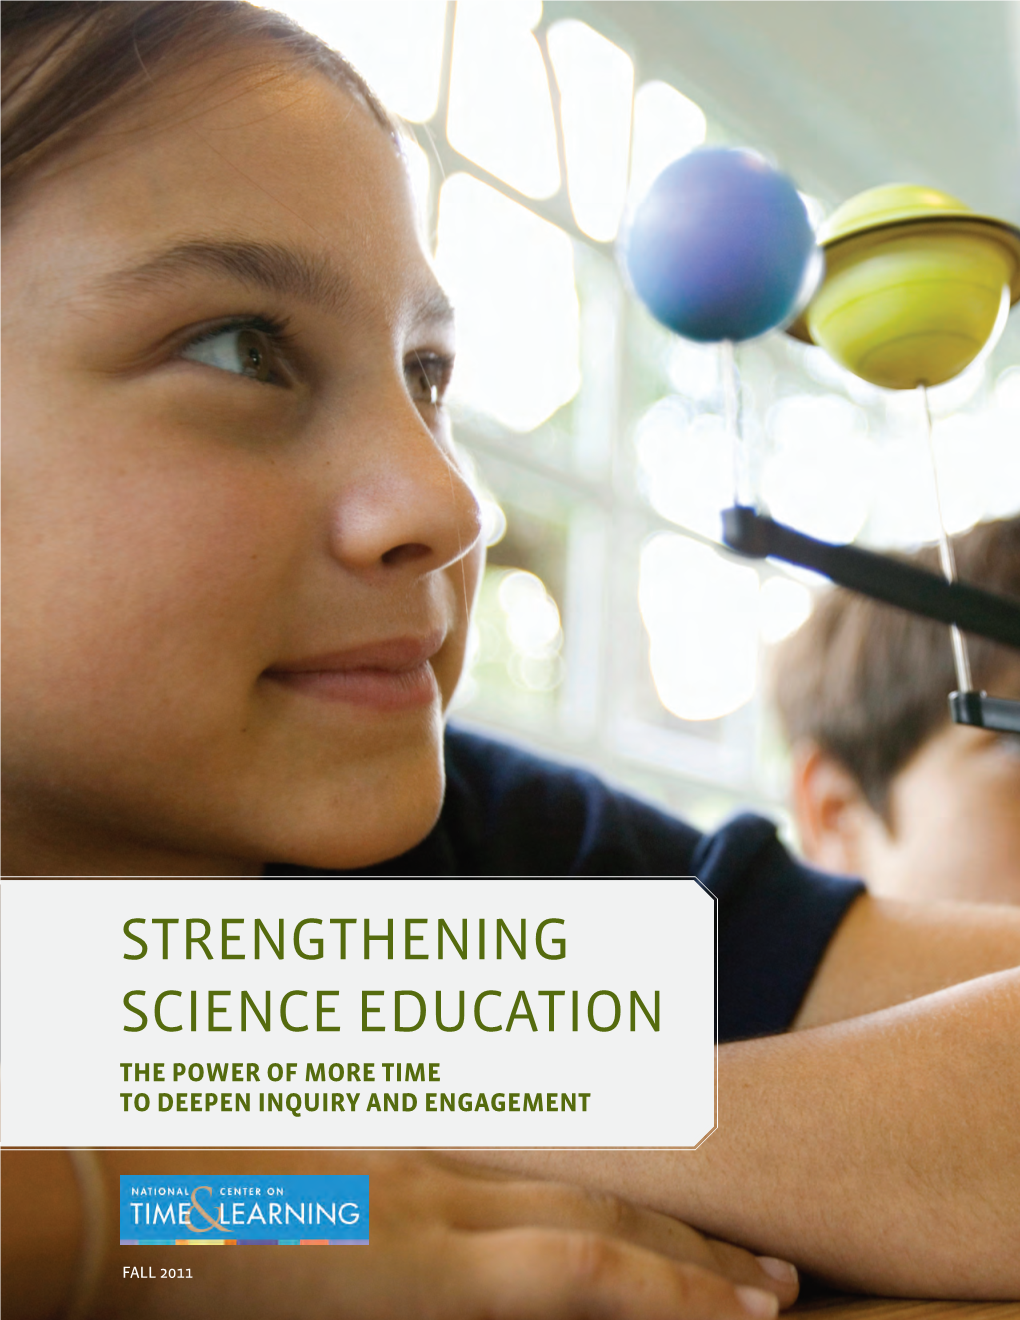 Strengthening Science Education the Power of More Time to Deepen Inquiry and Engagement